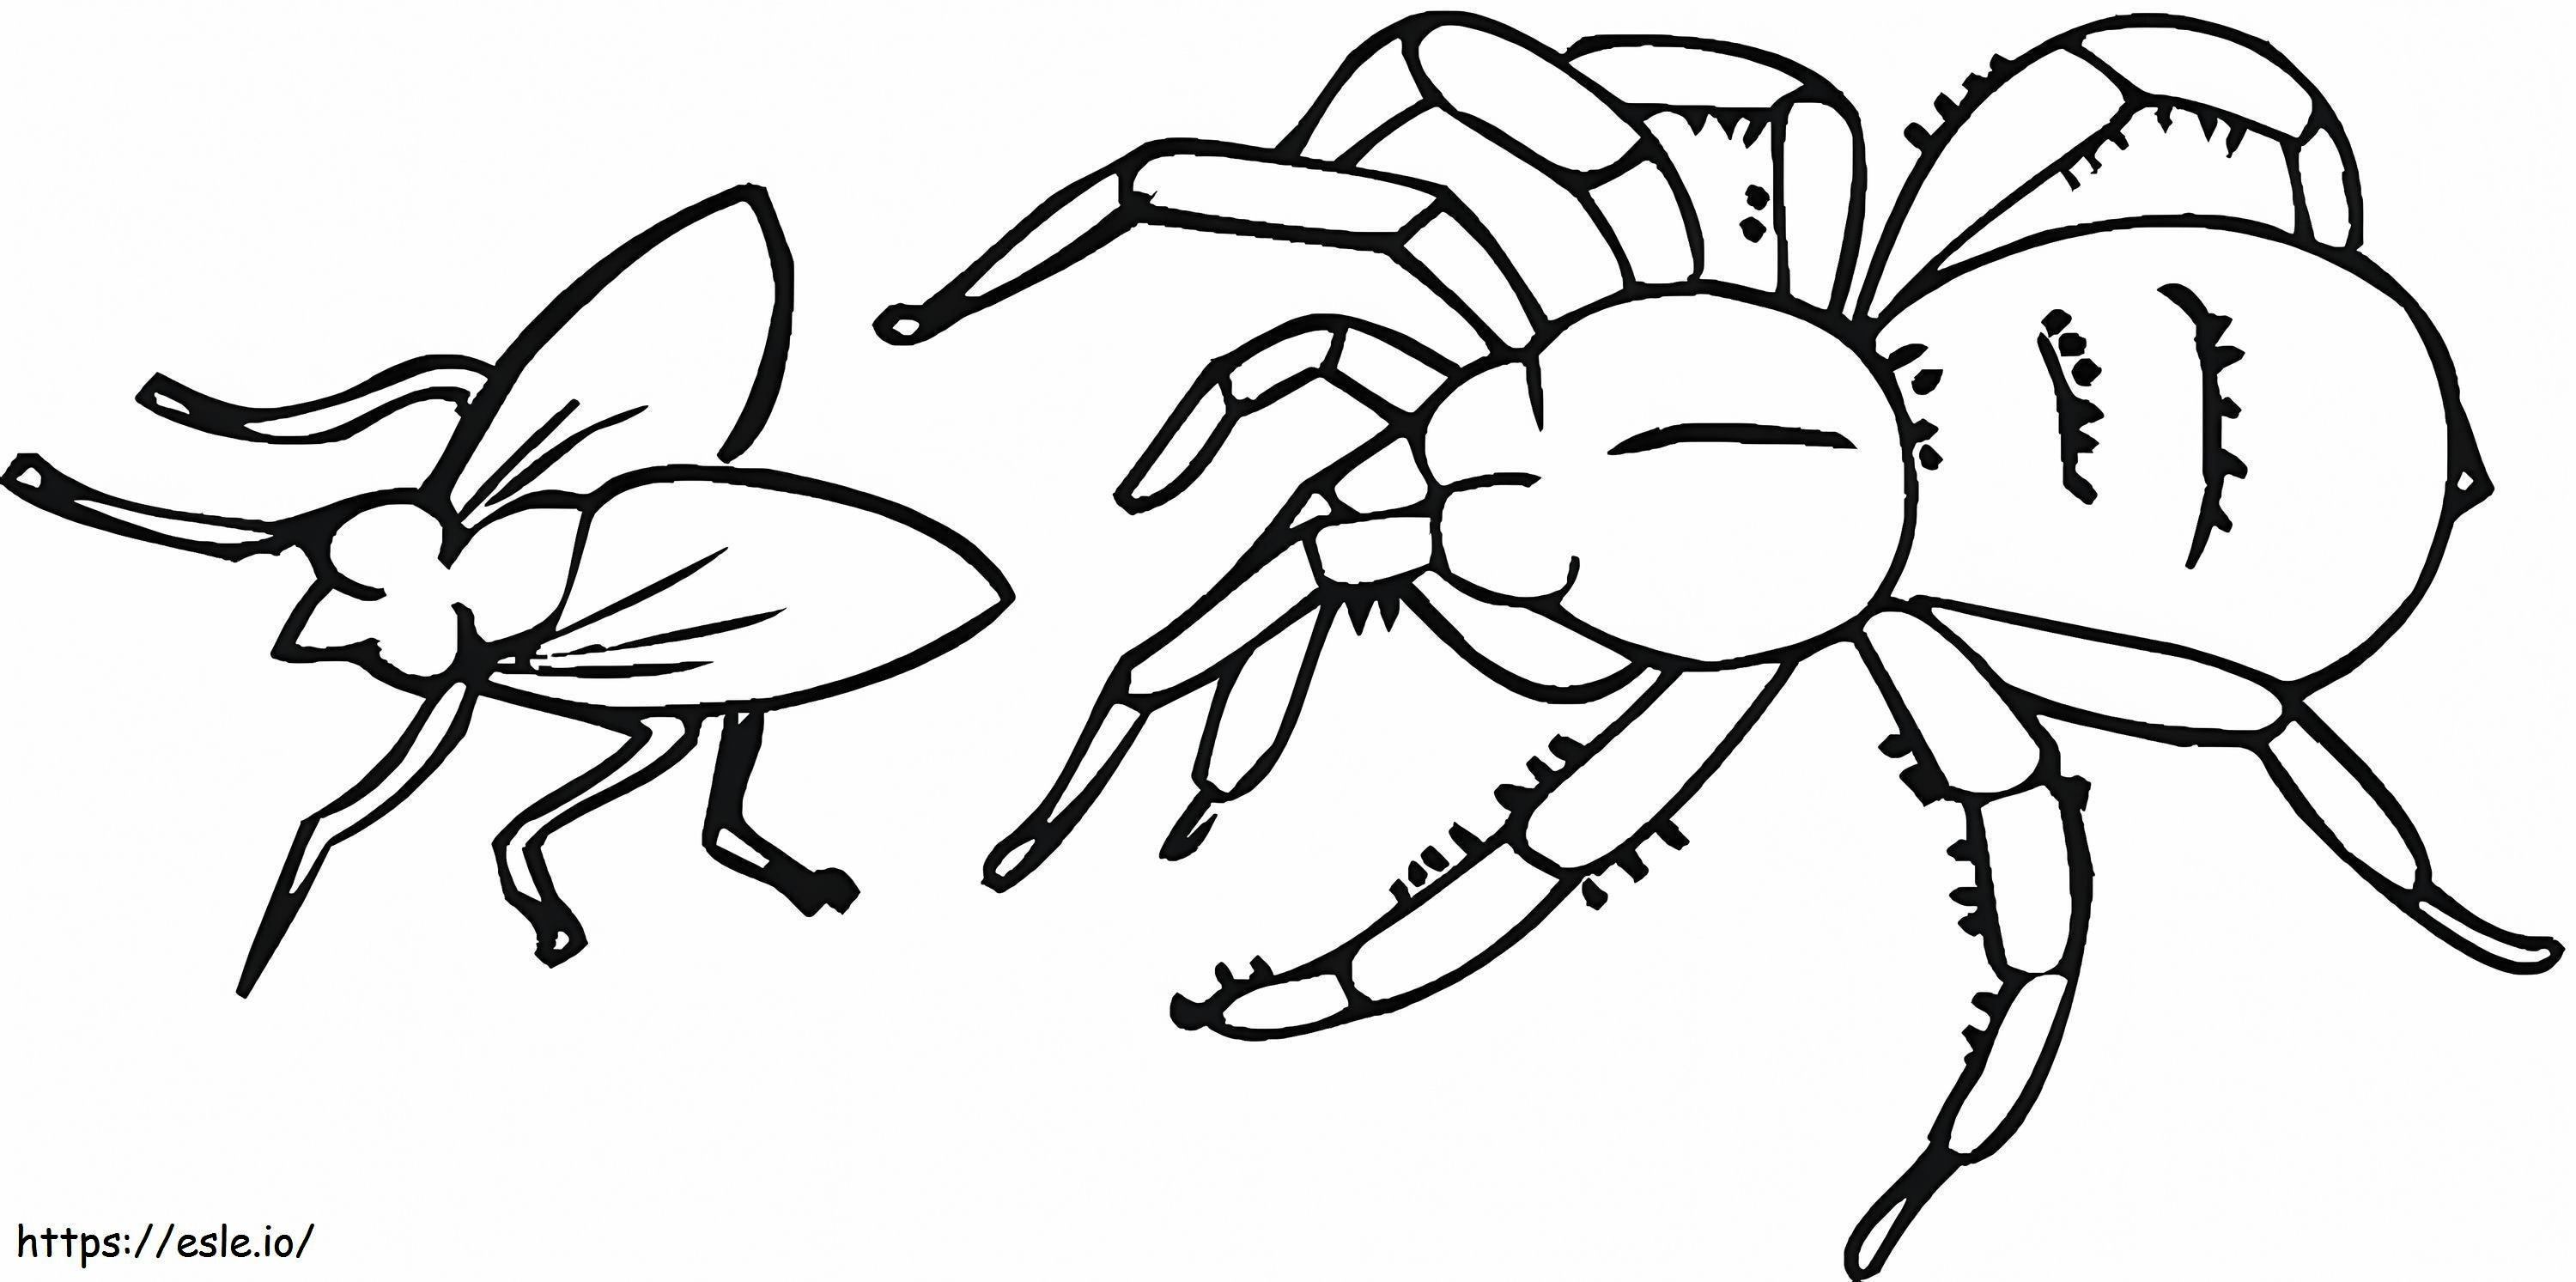 Spider And Fly coloring page